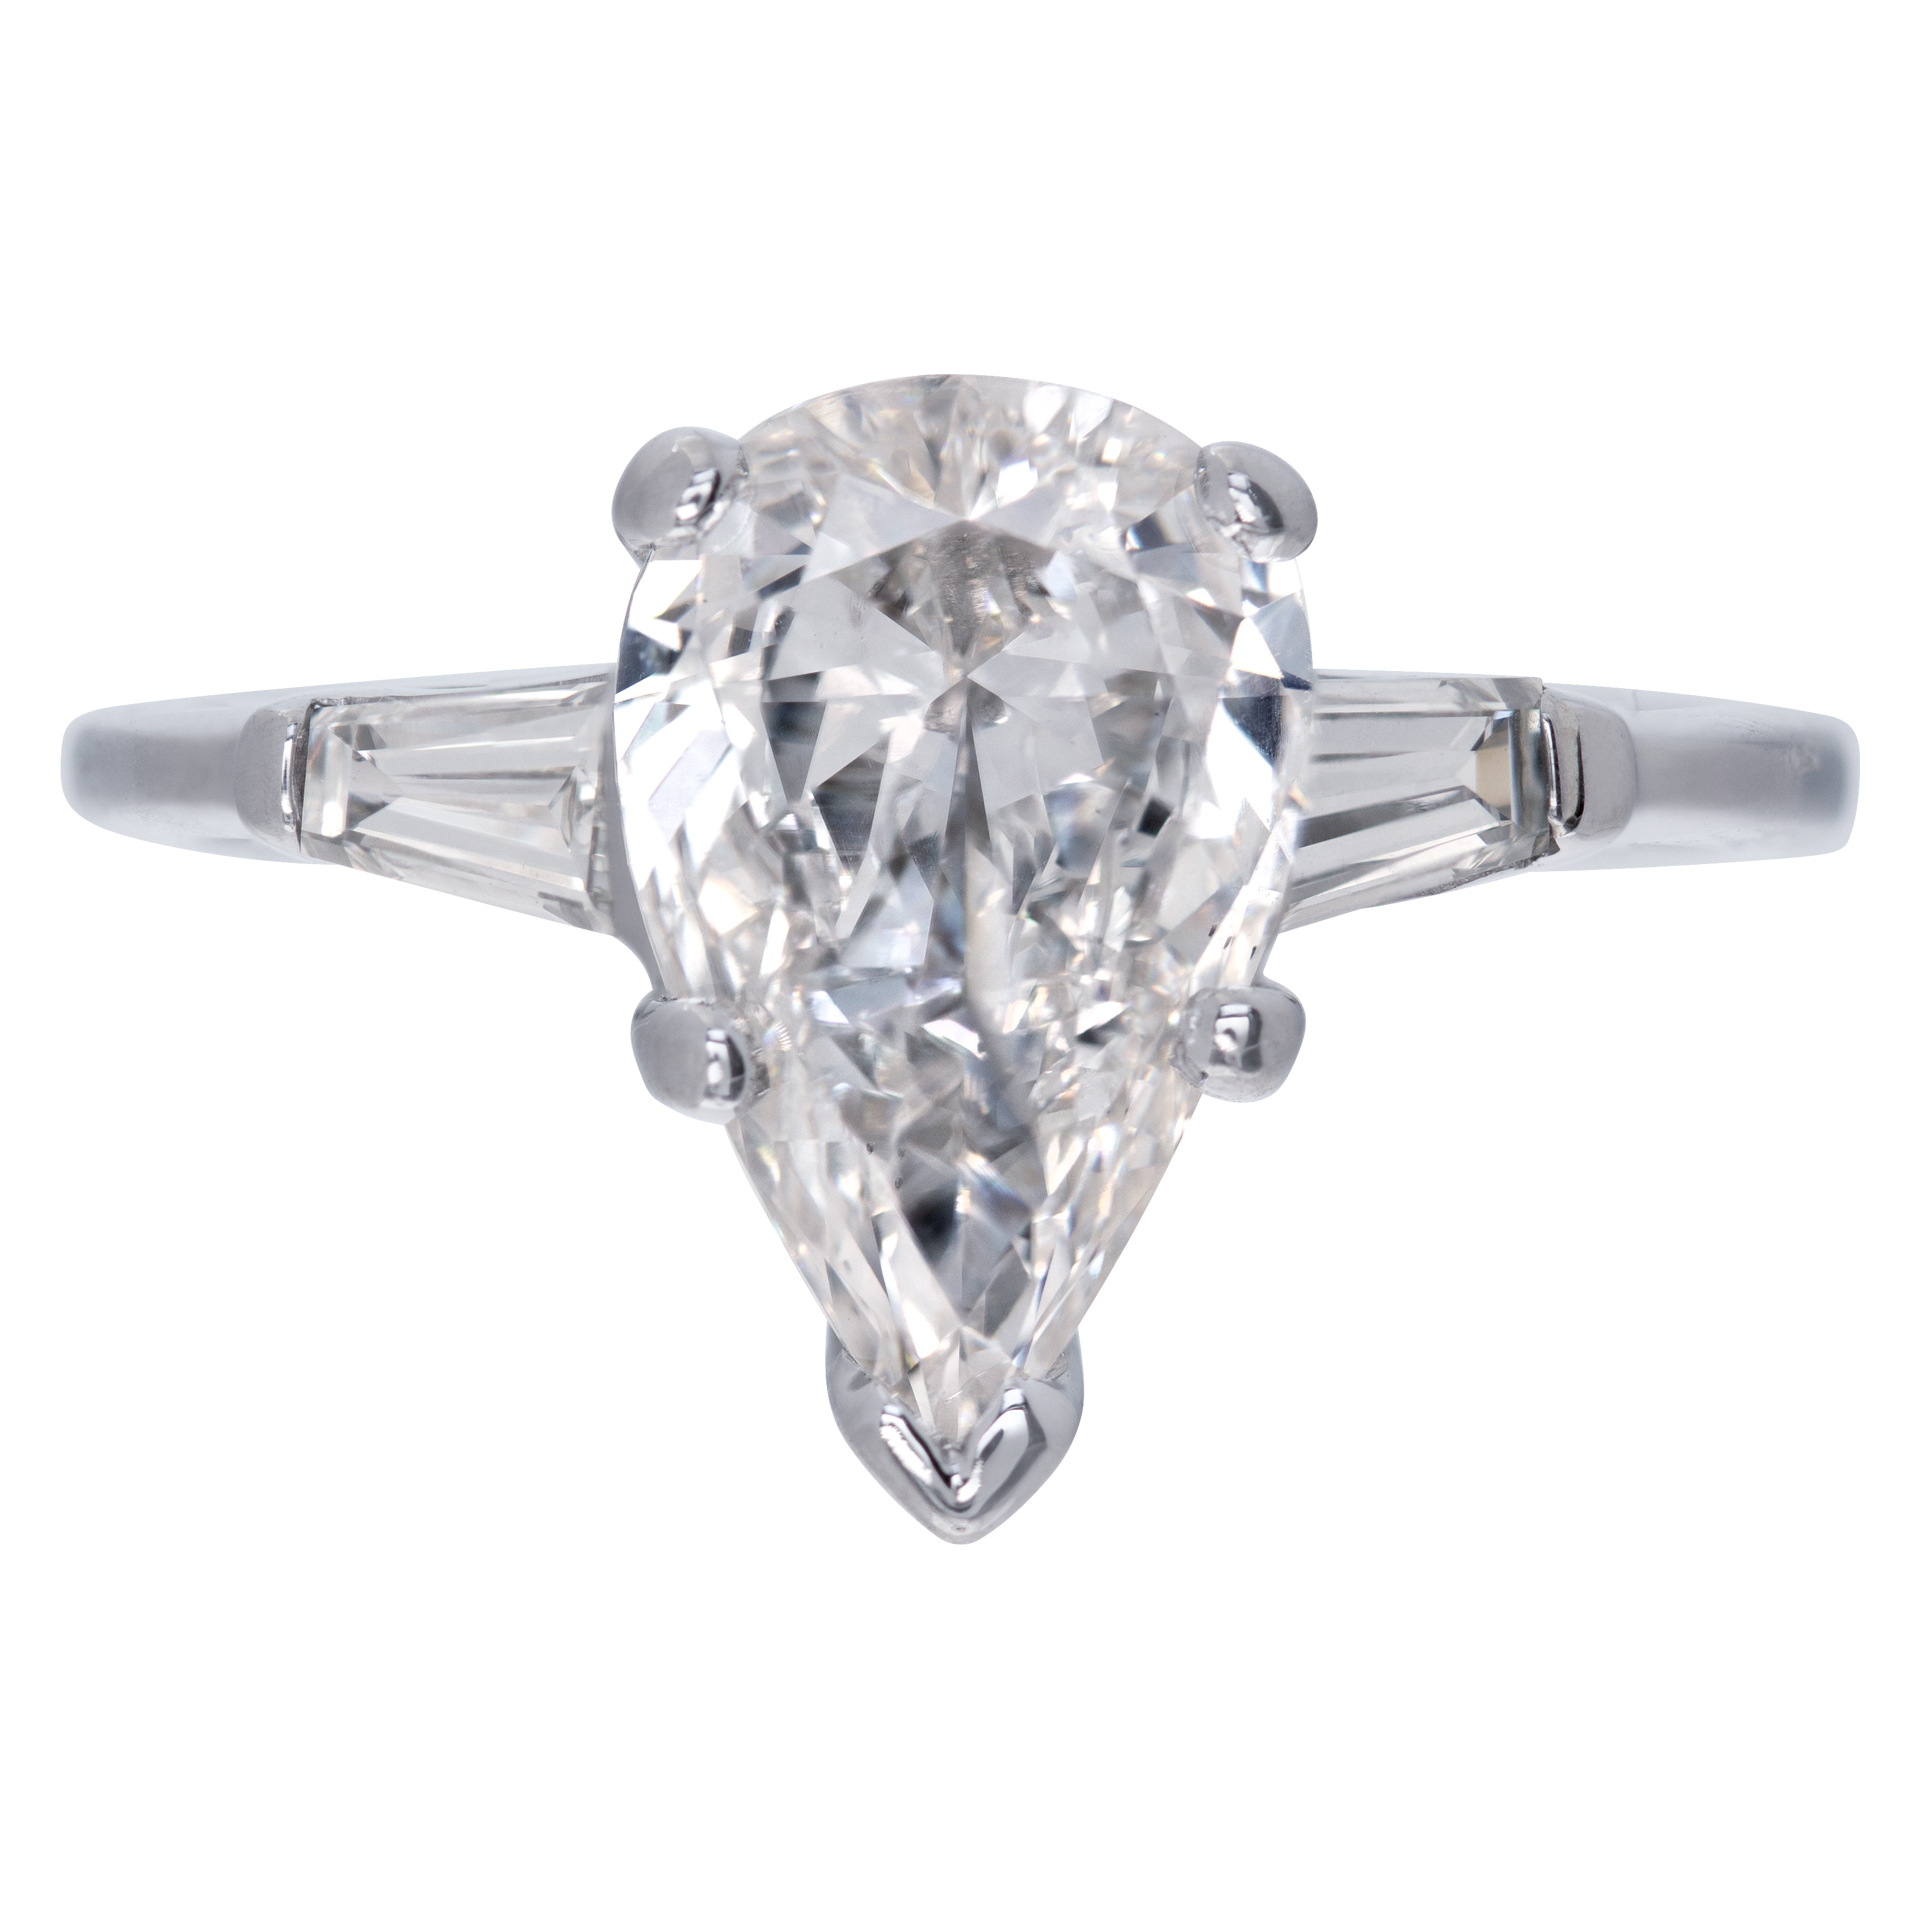 GIA Certified pear shaped diamond ring with 2.08 carat diamond (I color, VS2 clarity). in platinum setting image 2